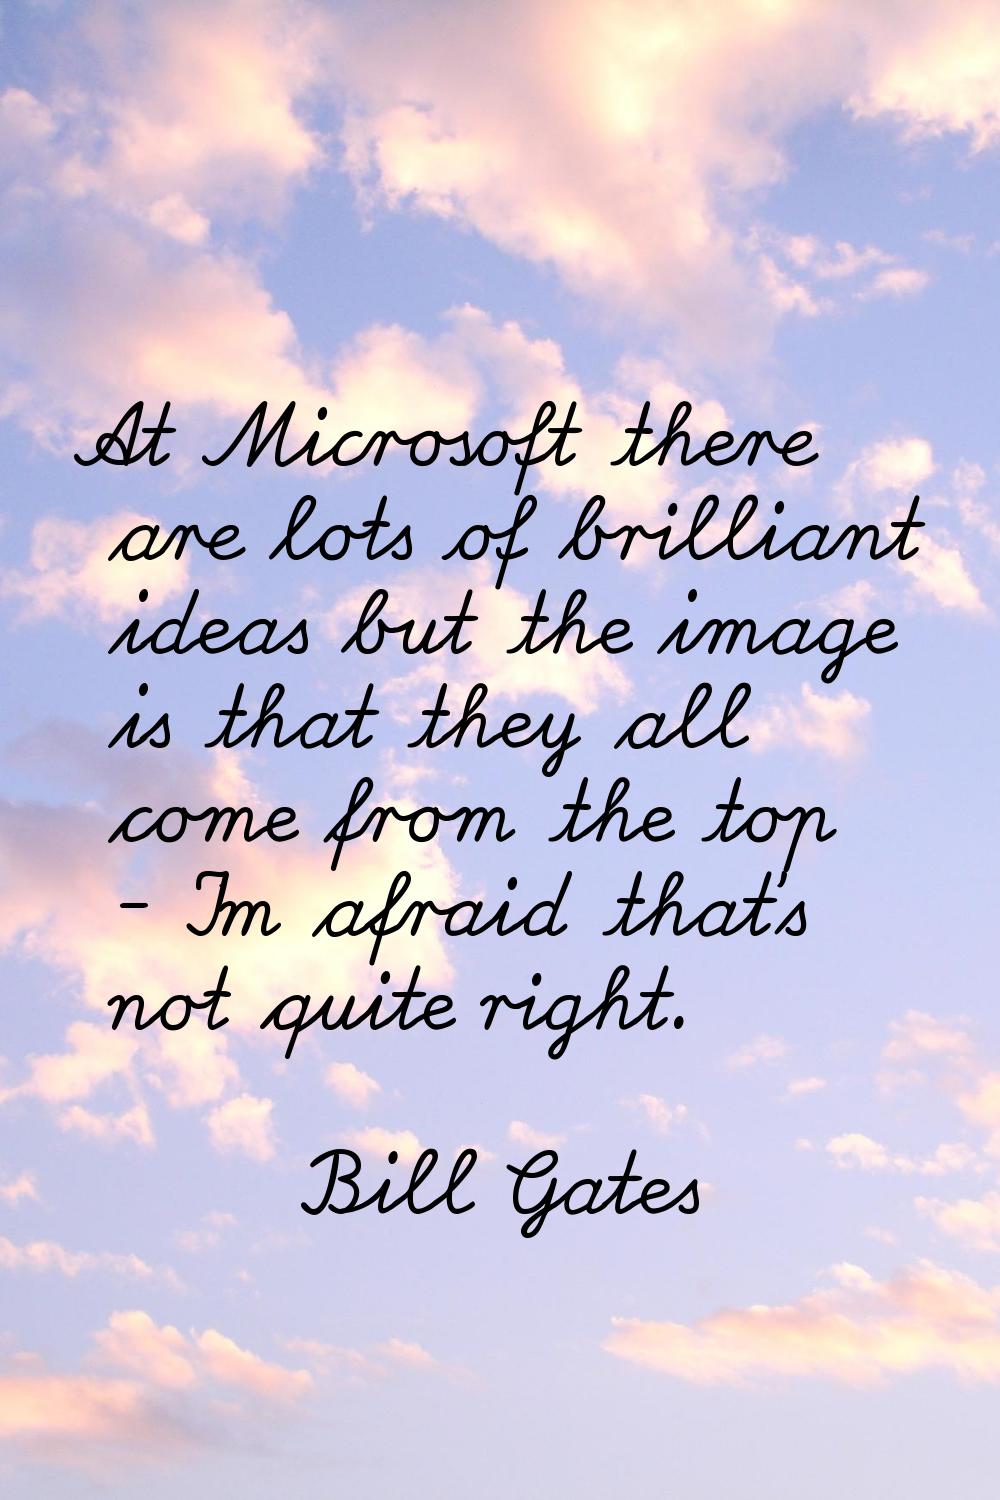 At Microsoft there are lots of brilliant ideas but the image is that they all come from the top - I